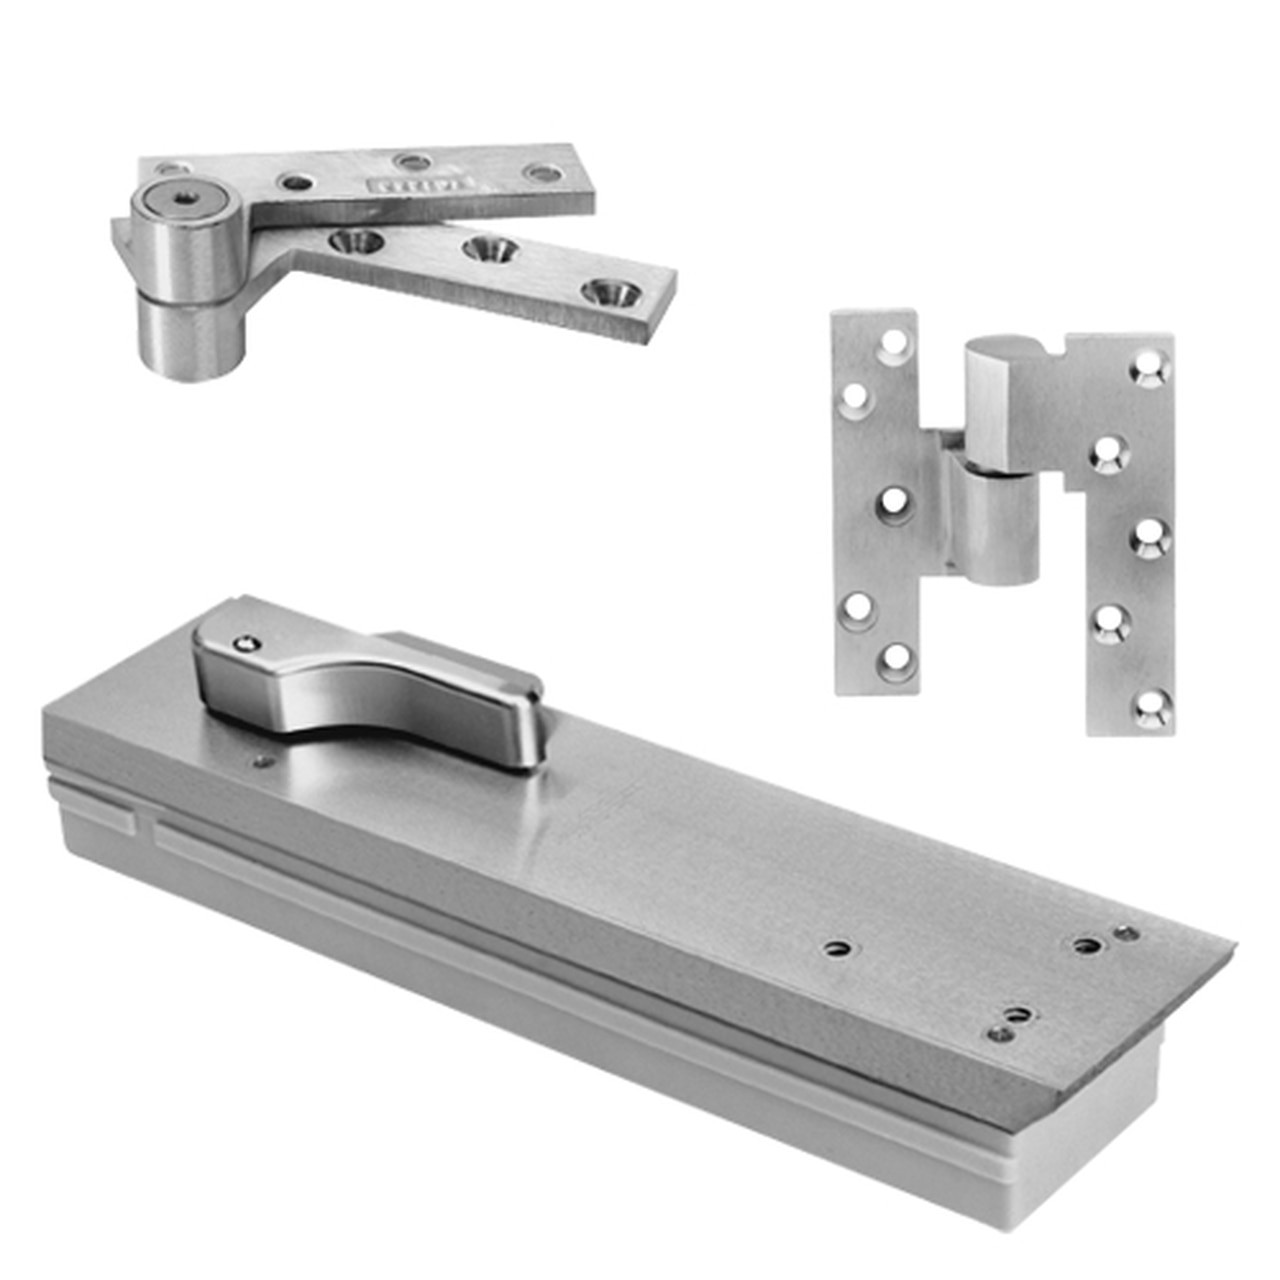 FQ5103NBC-LFP-LTP-LH-626 Rixson Q51 Series Fire Rated 3/4" Offset Hung Shallow Depth Floor Closers in Satin Chrome Finish